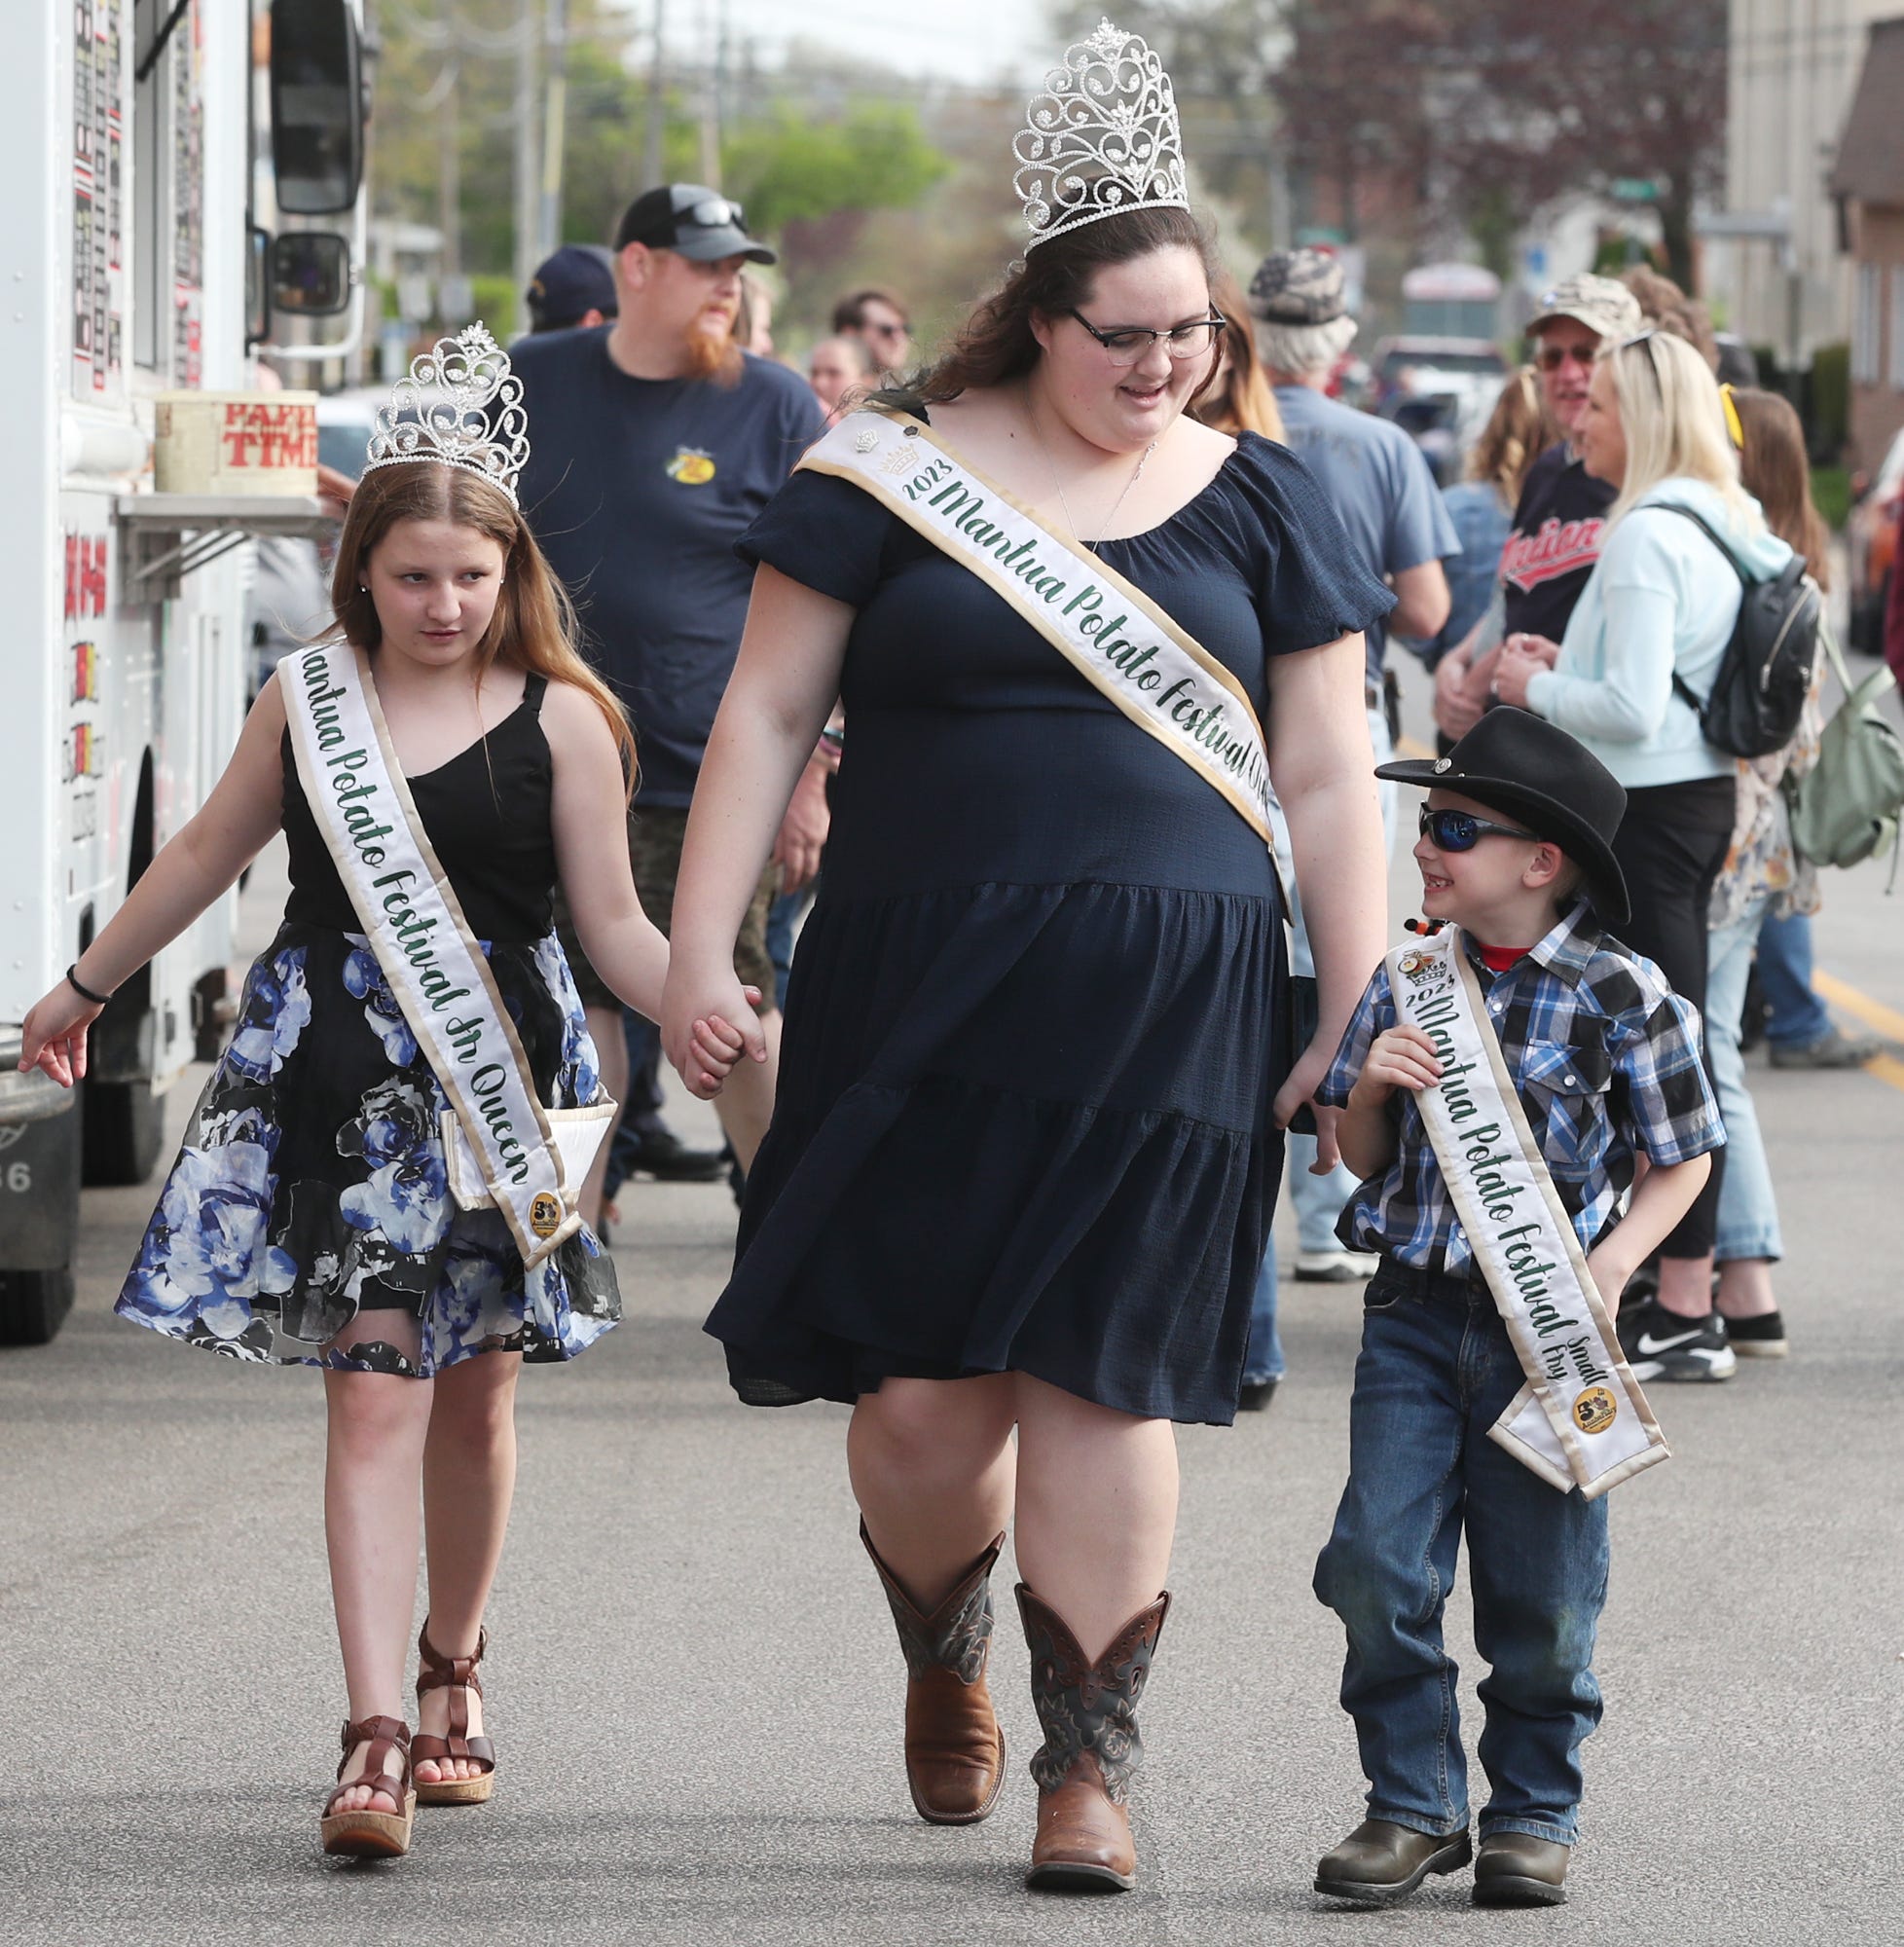 Mackenzie Thompson 2023 Mantua Potato Festival Queen, center, walks with Hailey Roosa the 2023 Junior Queen, left and Hudson Roosa-Varner, 2023 Small Fry as they take in the Ravenna JoJo Fest on Friday, April 26, 2024 in Ravenna.